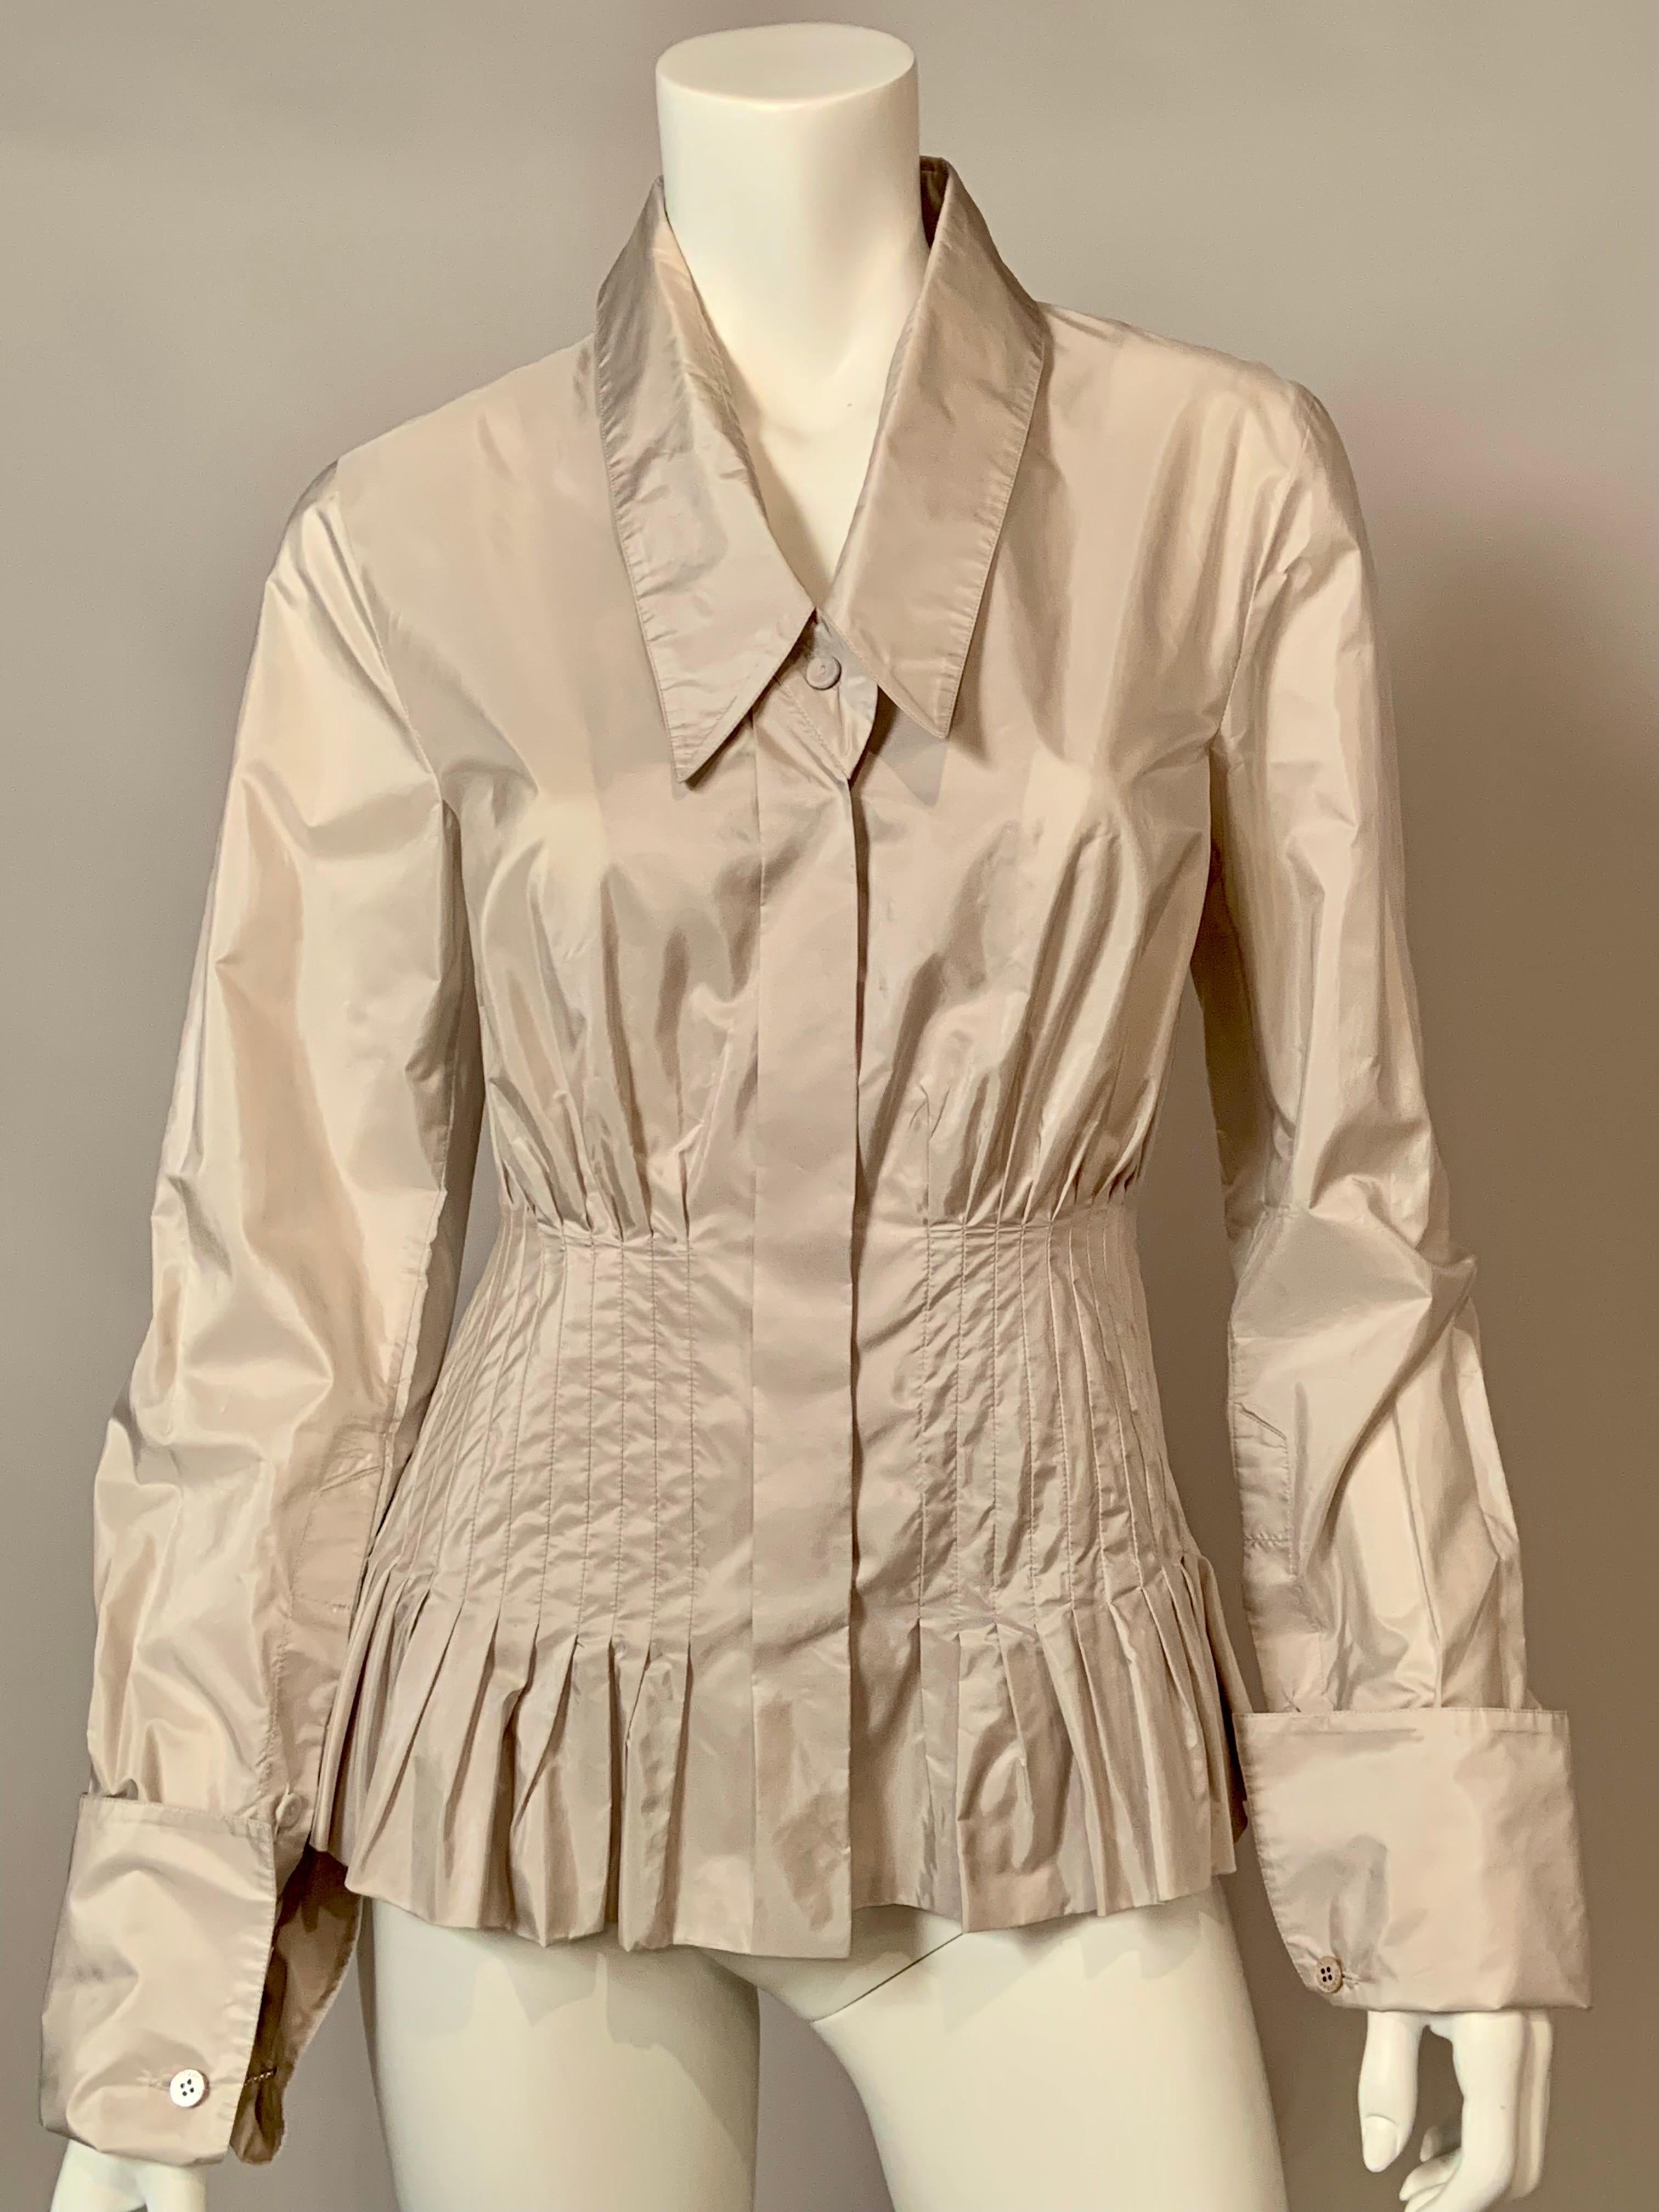 Gianfranco Ferre Pale Oyster Grey Silk Blouse with Peplum In Excellent Condition For Sale In New Hope, PA